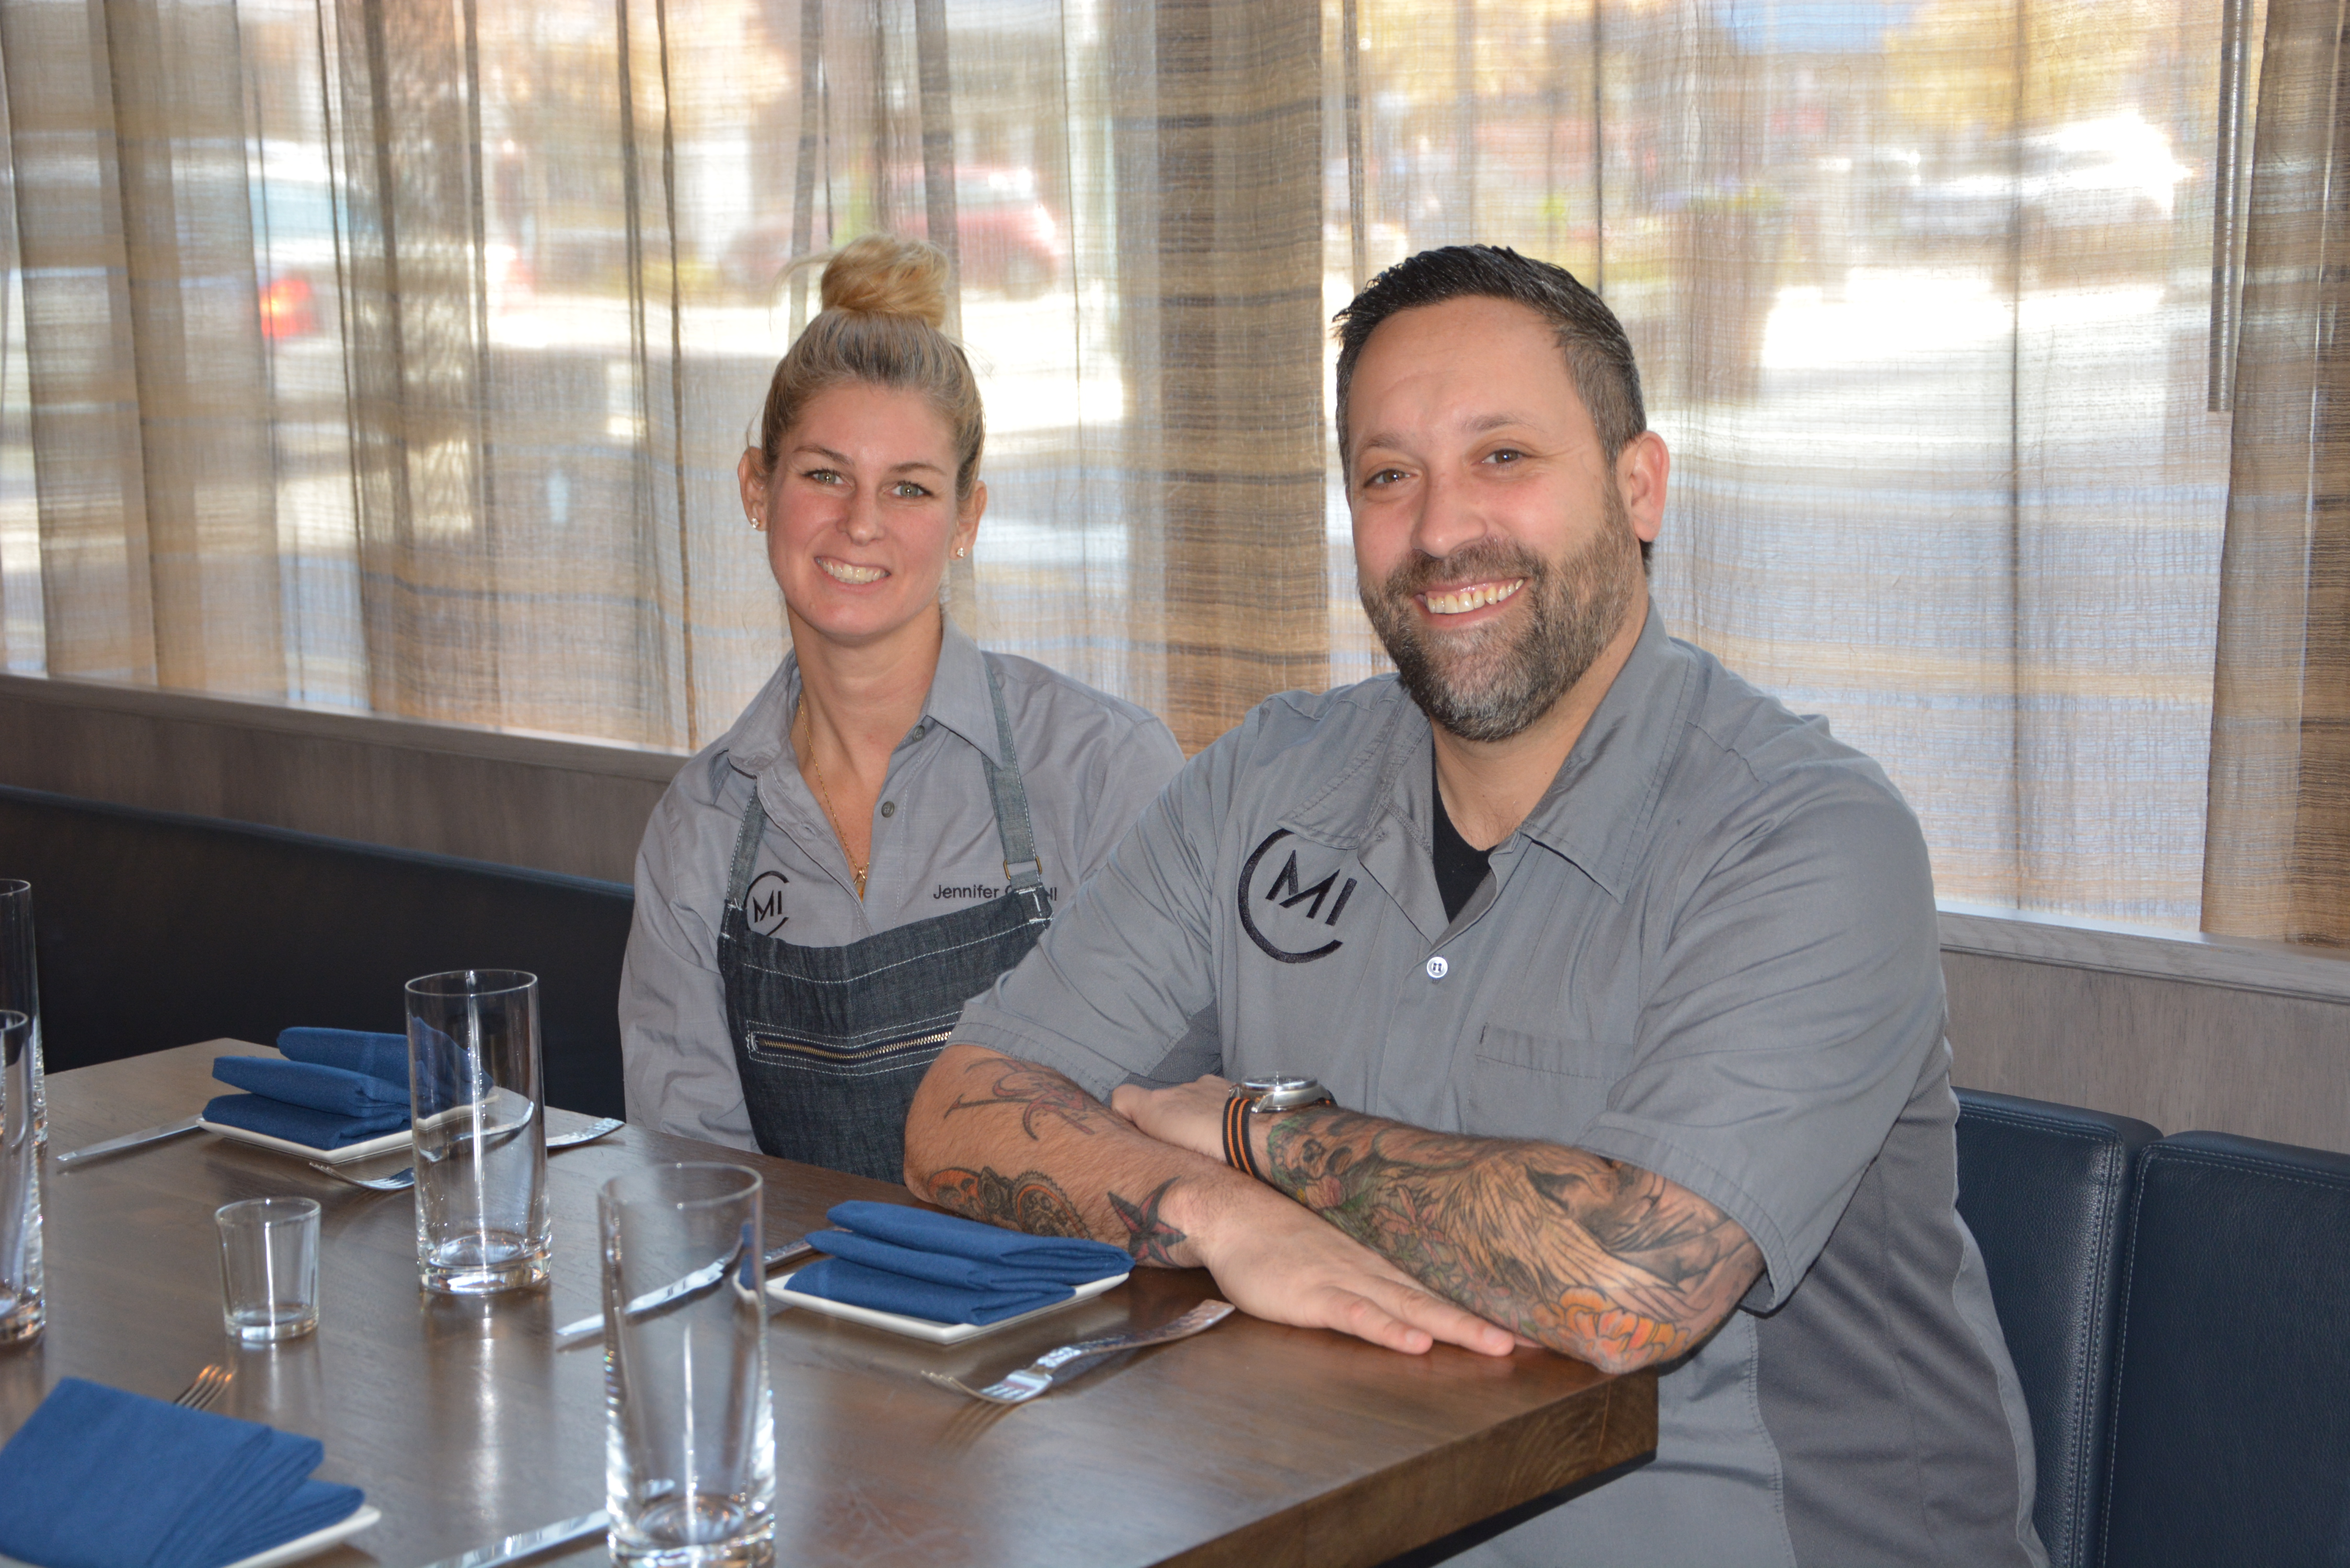 Jennifer Carroll and Mike Isabella at Requin